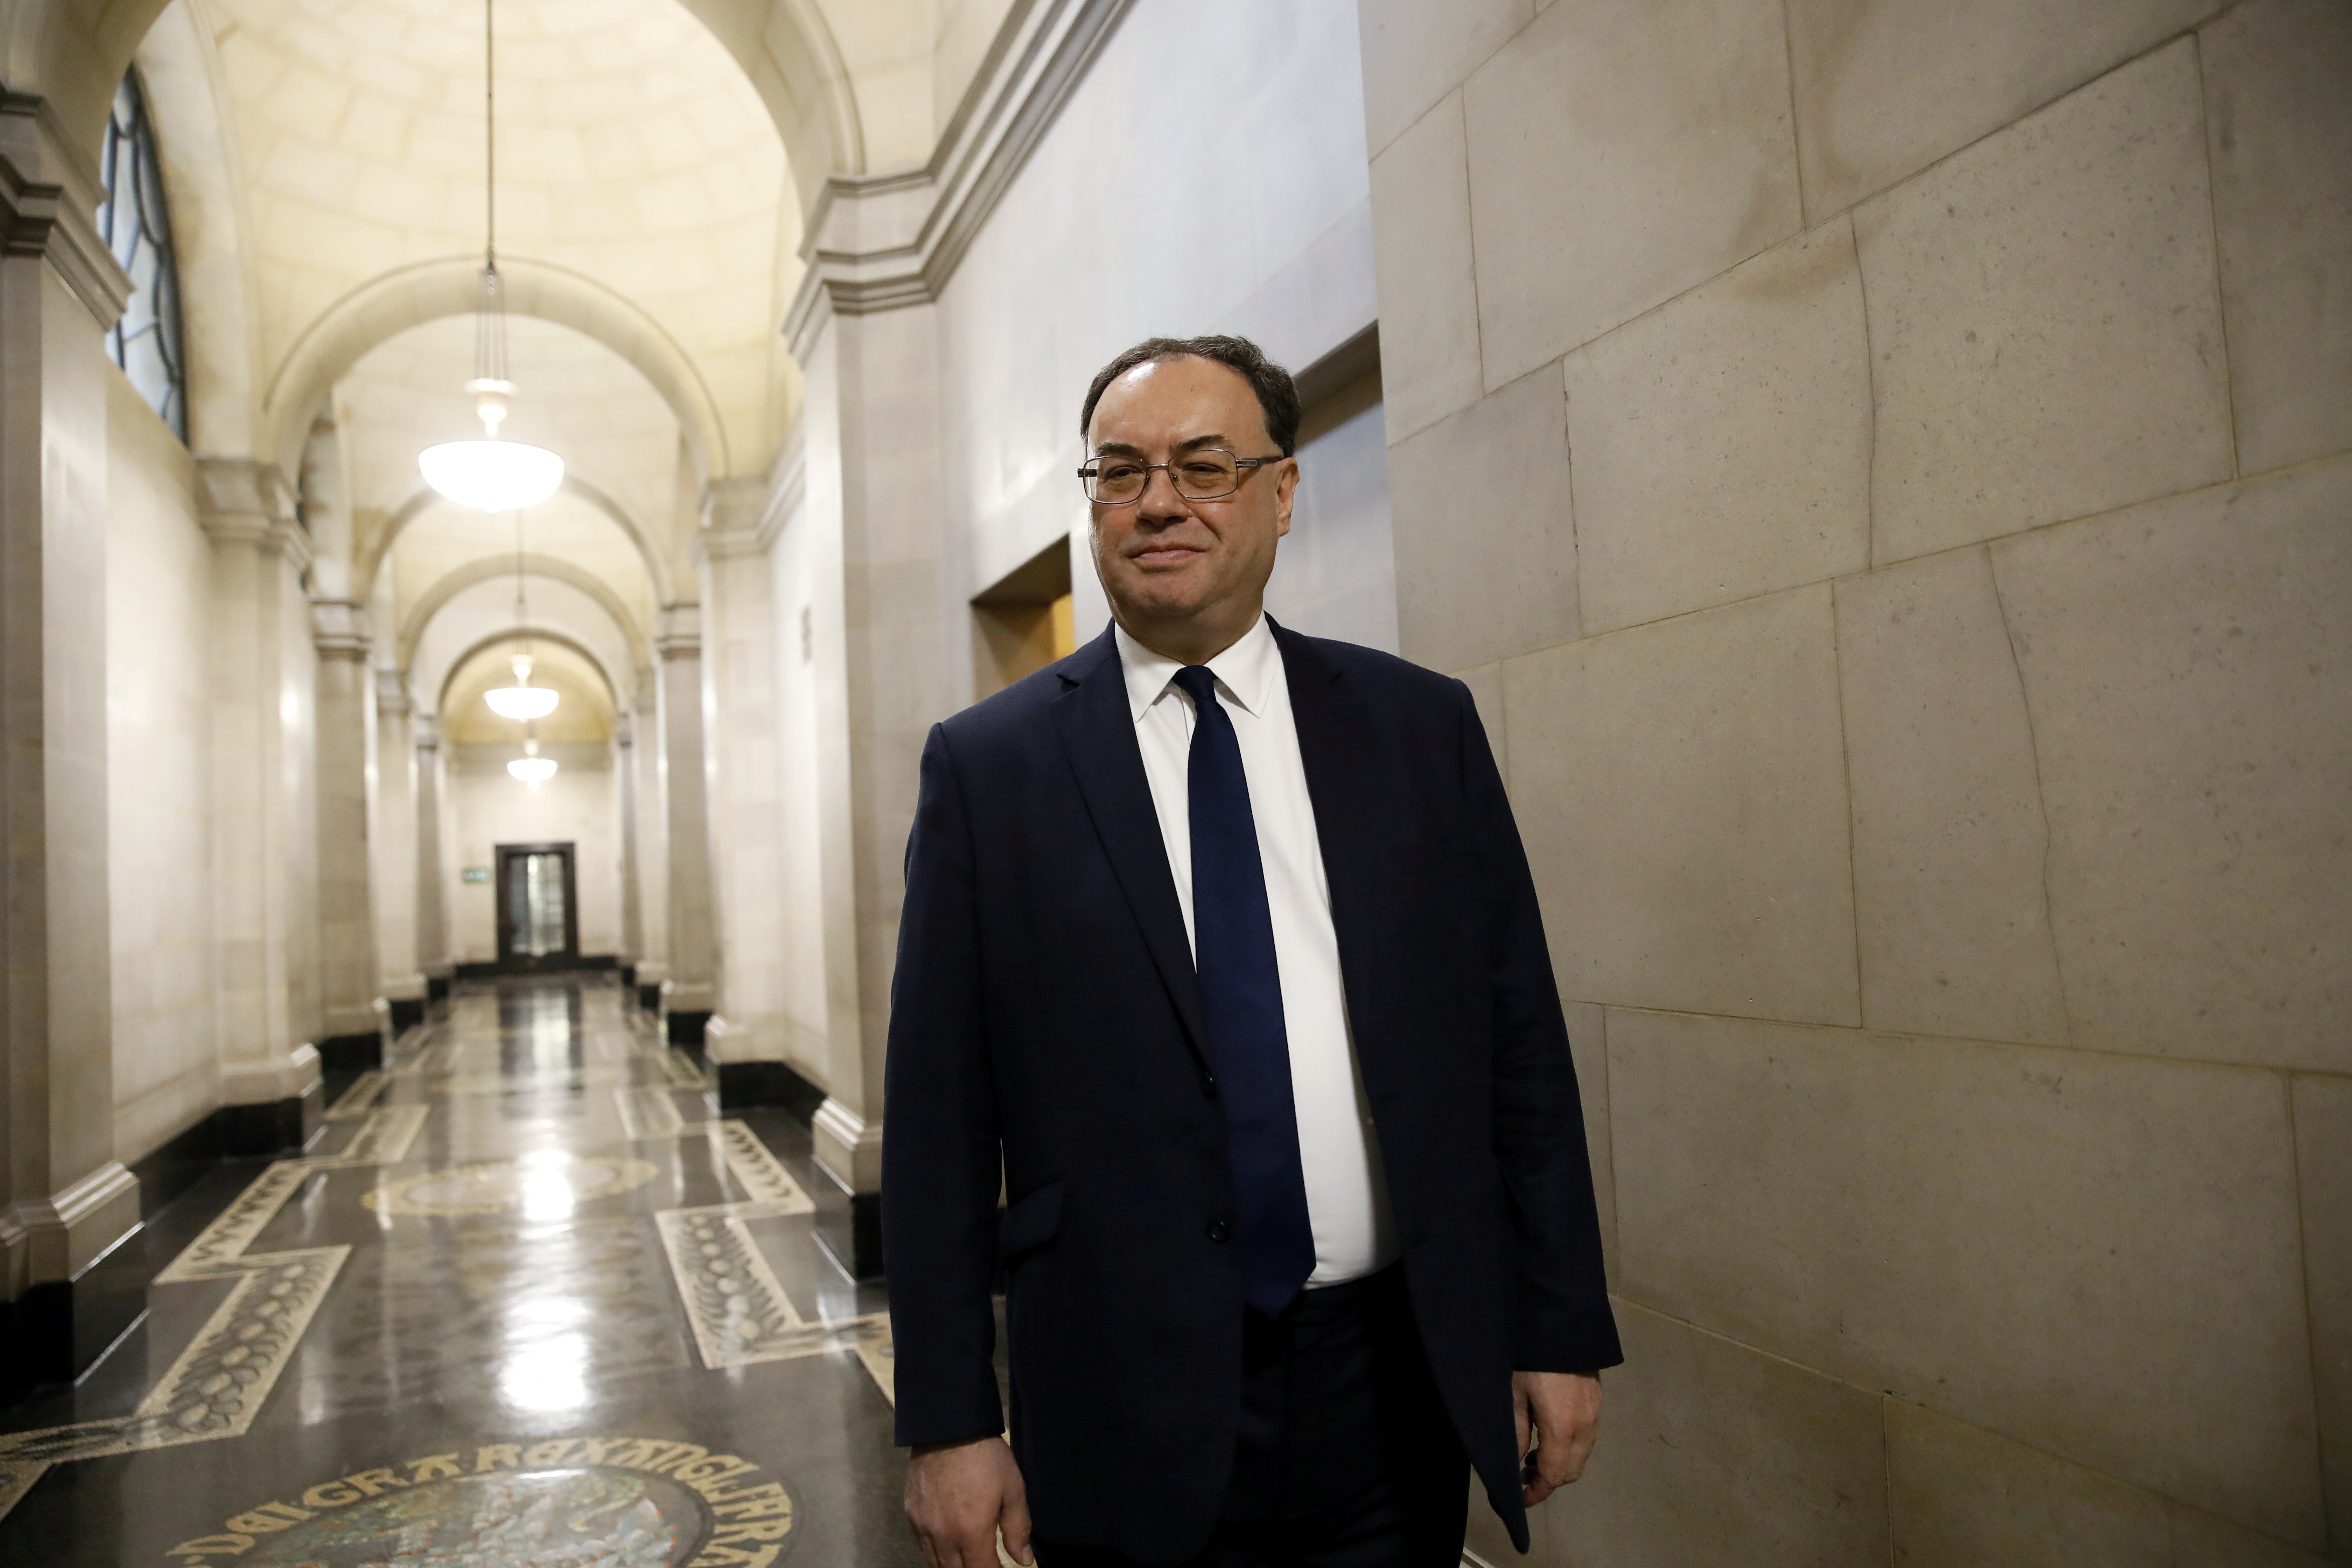 Bank of England Governor Andrew Bailey poses for a photograph on the first day of his new role at the Central Bank in London, Britain March 16, 2020. Tolga Akmen/Pool via REUTERS/File Photo